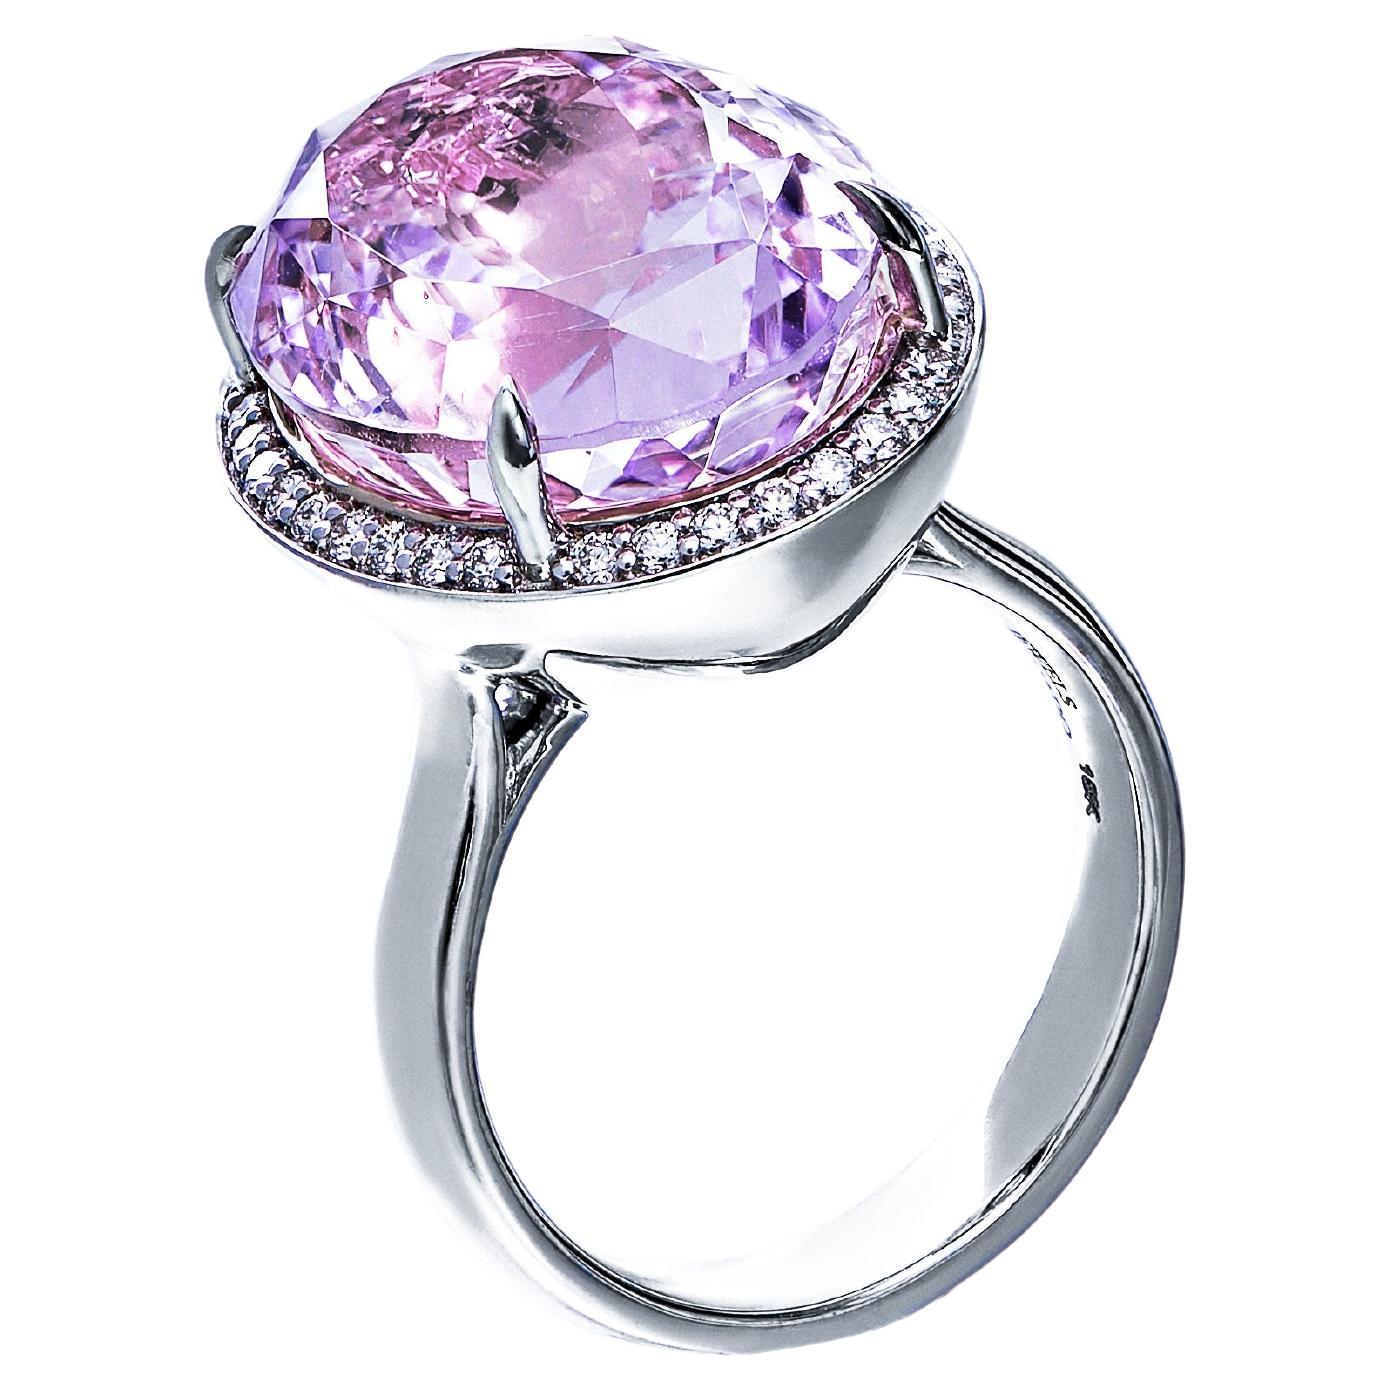 Introducing our mesmerizing Solitaire Kunzite Diamond Halo Ring, a stunning symbol of elegance and grace. This exquisite ring features a captivating oval-cut Kunzite stone, surrounded by a halo of small diamonds, all set on a combination of 18-karat